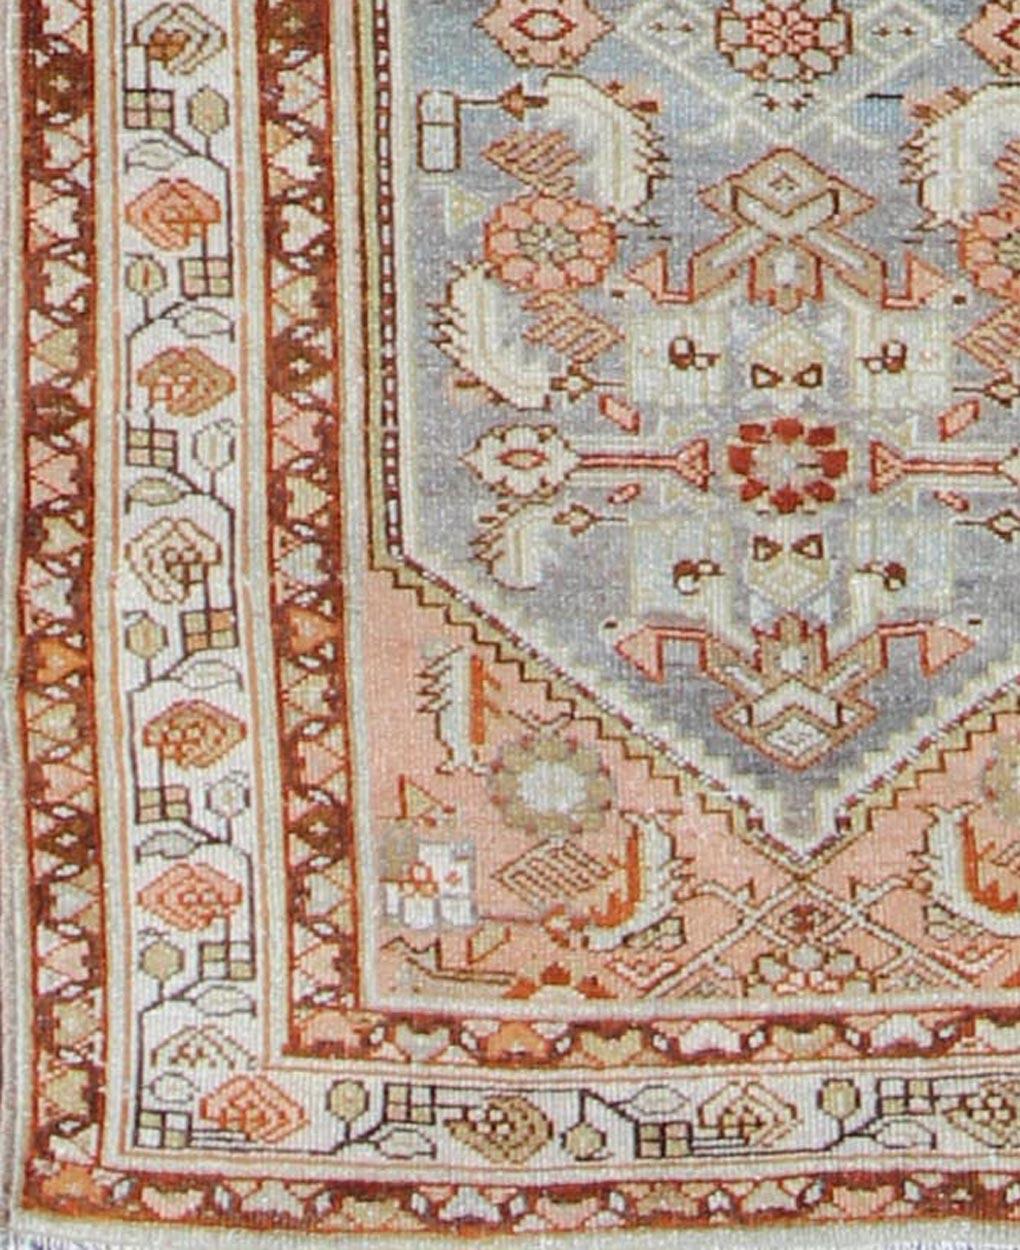 Colorful Floral Geometric Persian Malayer antique runner with vertical medallions, rug sus-1807-285, country of origin / type: Iran / Mahal, circa 1920.

This antique Persian Malayer runner, circa early 20th century, relies heavily on exquisite